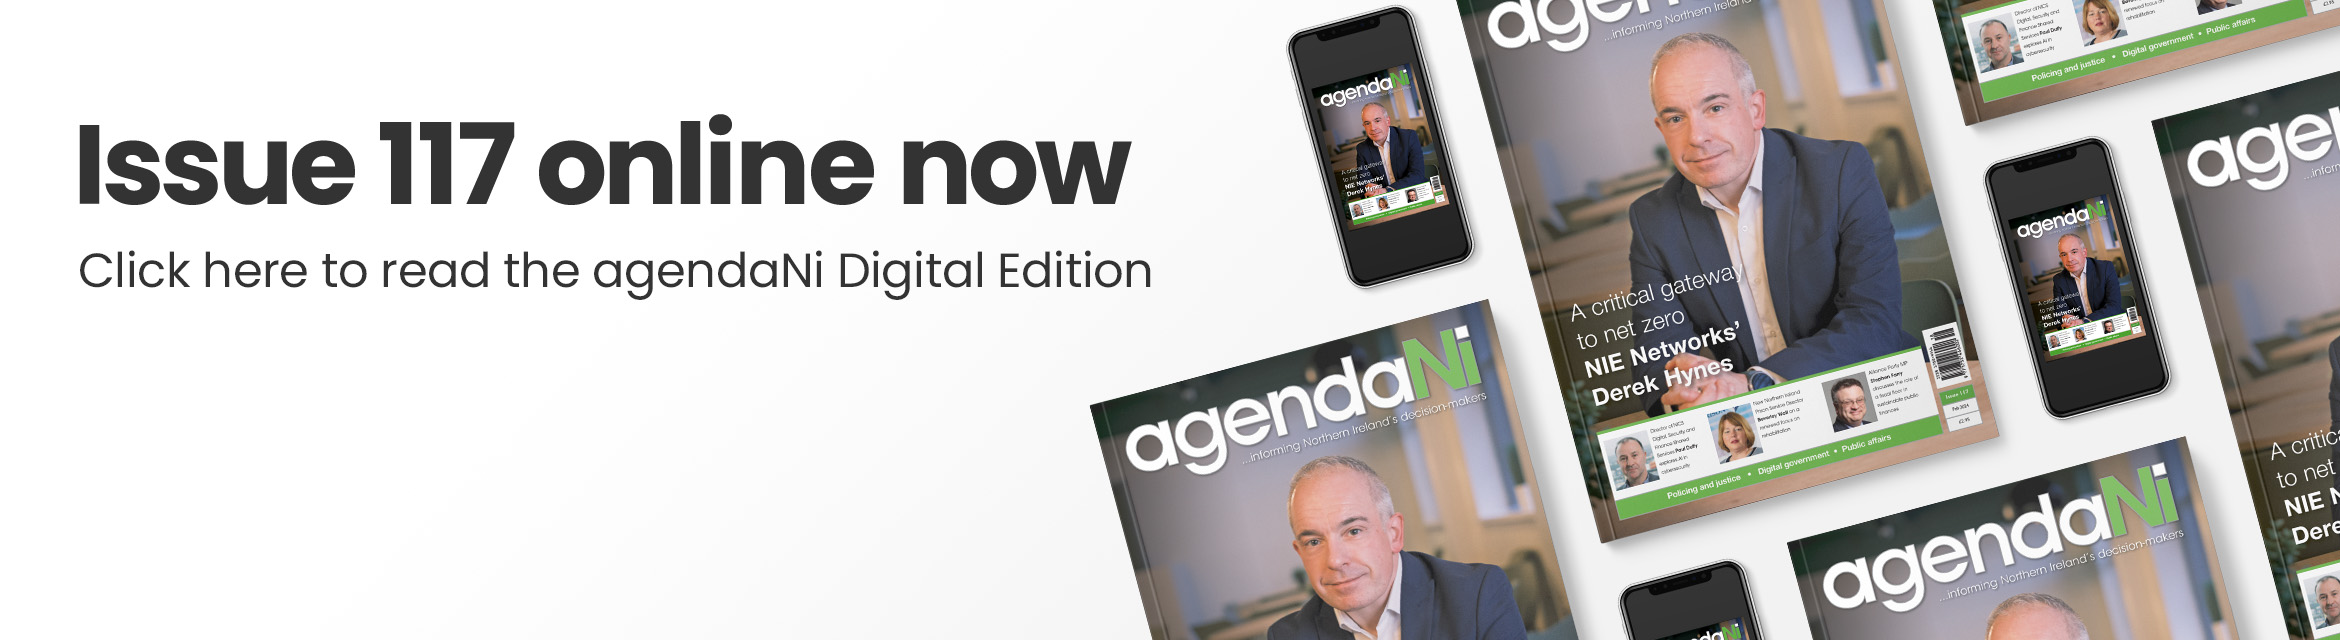 Issue 117 online now. Click here to read the agendaNi Digital Edition.